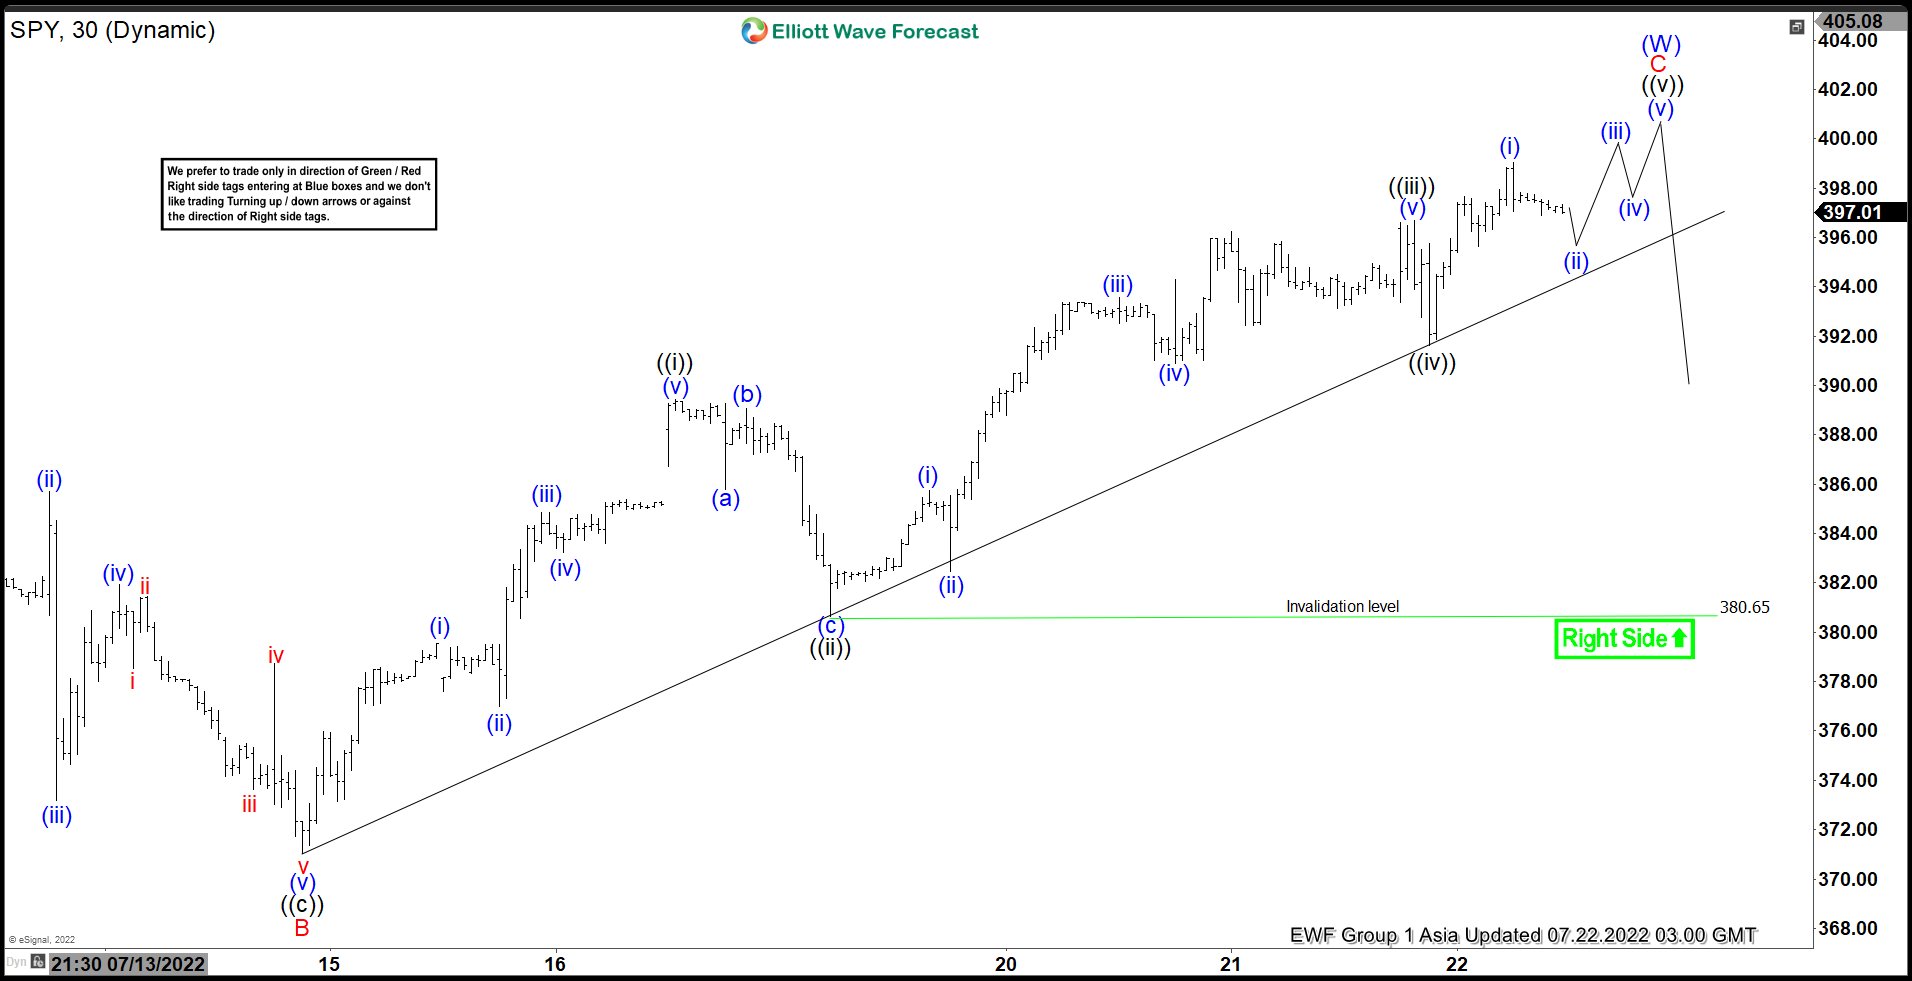 Elliott Wave View: SPY Could See A Pullback Soon